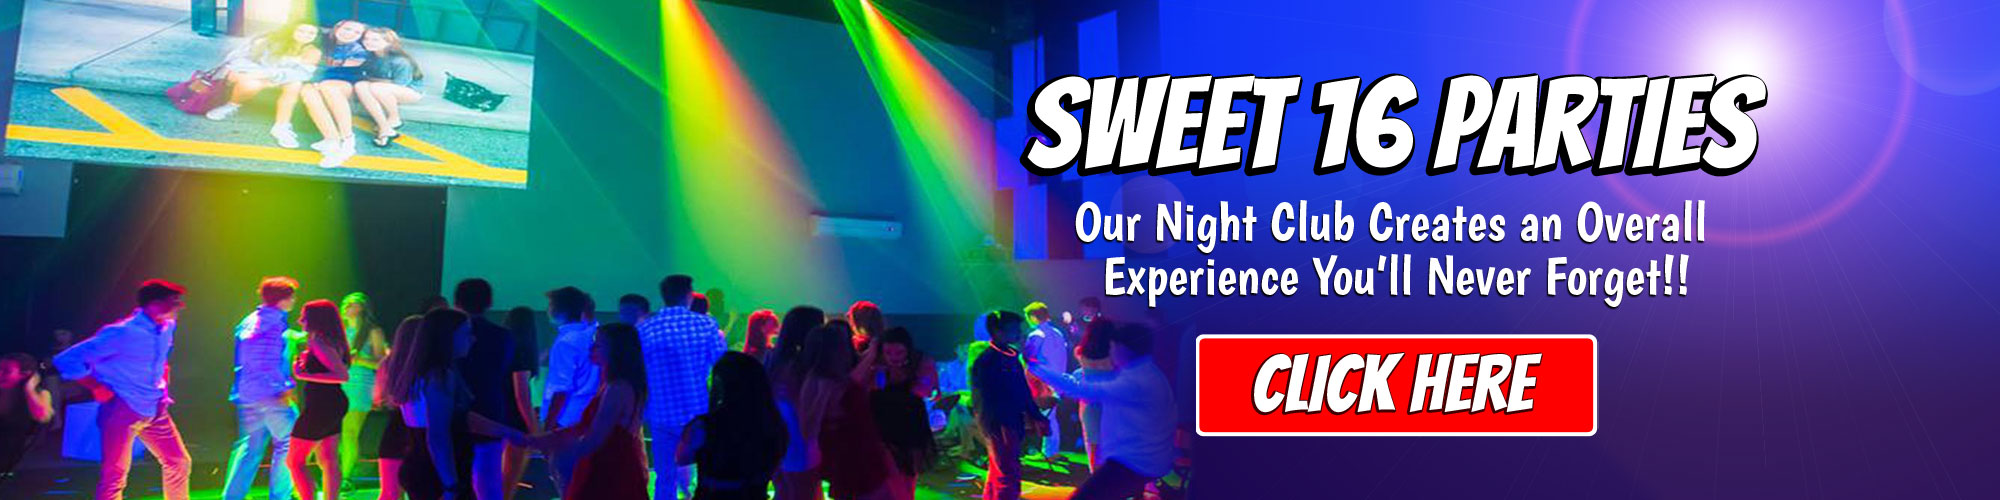 Sweet 16 Night Club Party